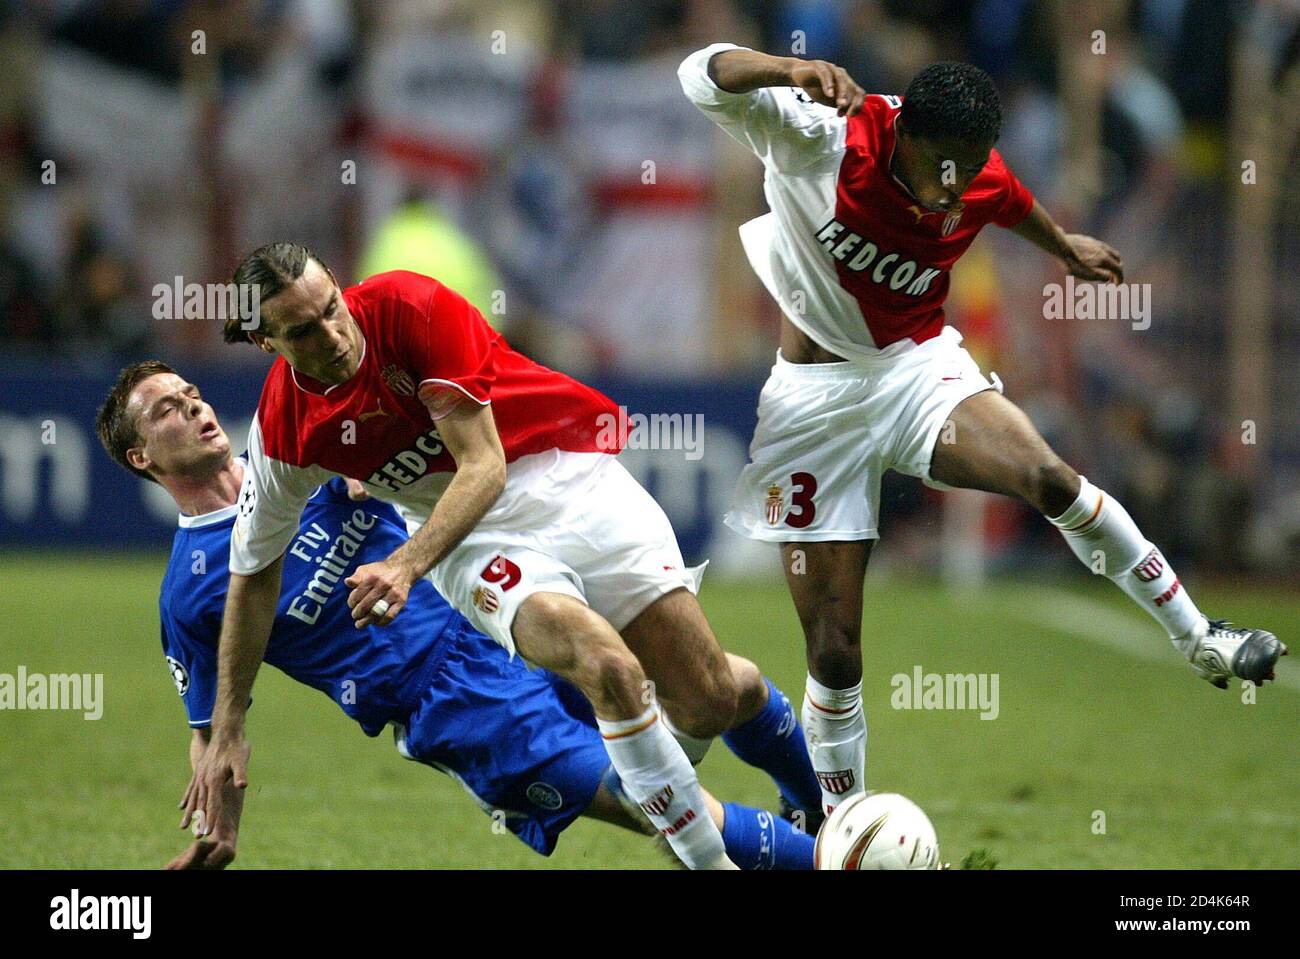 MONACO'S DADO PRSO AND PATRICE EVRA FIGHTS FOR THE BALL WITH CHELSEA'S JOHN  TERRY DURING THEIR CHAMPIONS LEAGUE SEMI-FINAL FIRST LEG SOCCER MATCH.  Monaco's Dado Prso (C) and Patrice Evra fights for